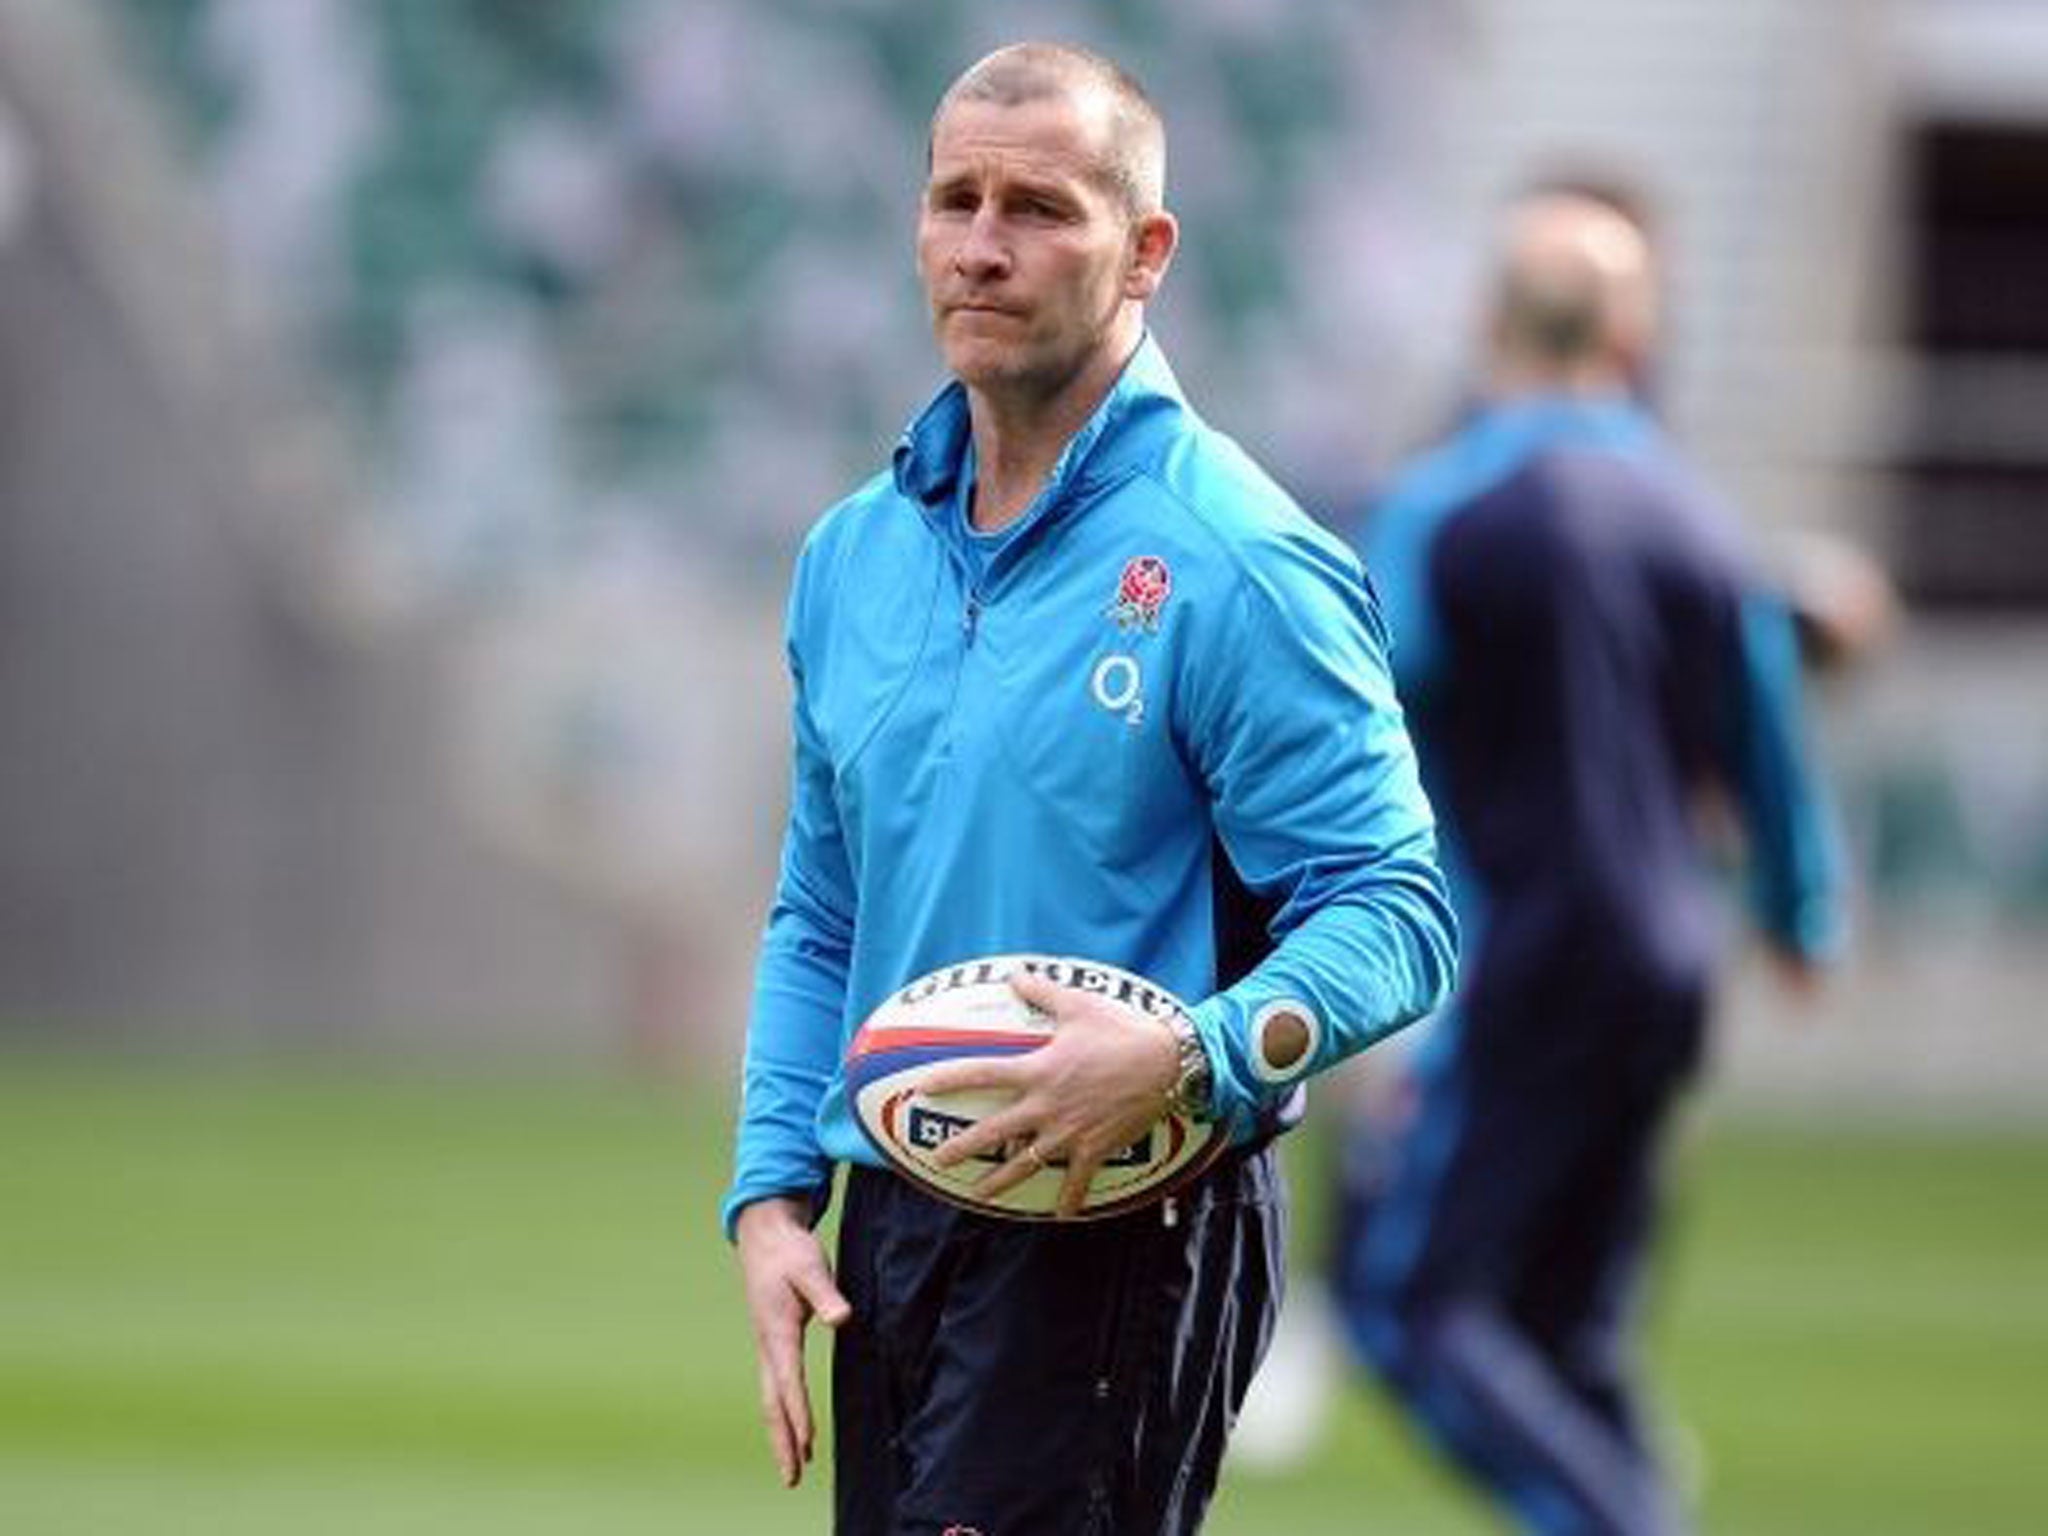 Stuart Lancaster and his coaches will have been studying Wales play closely